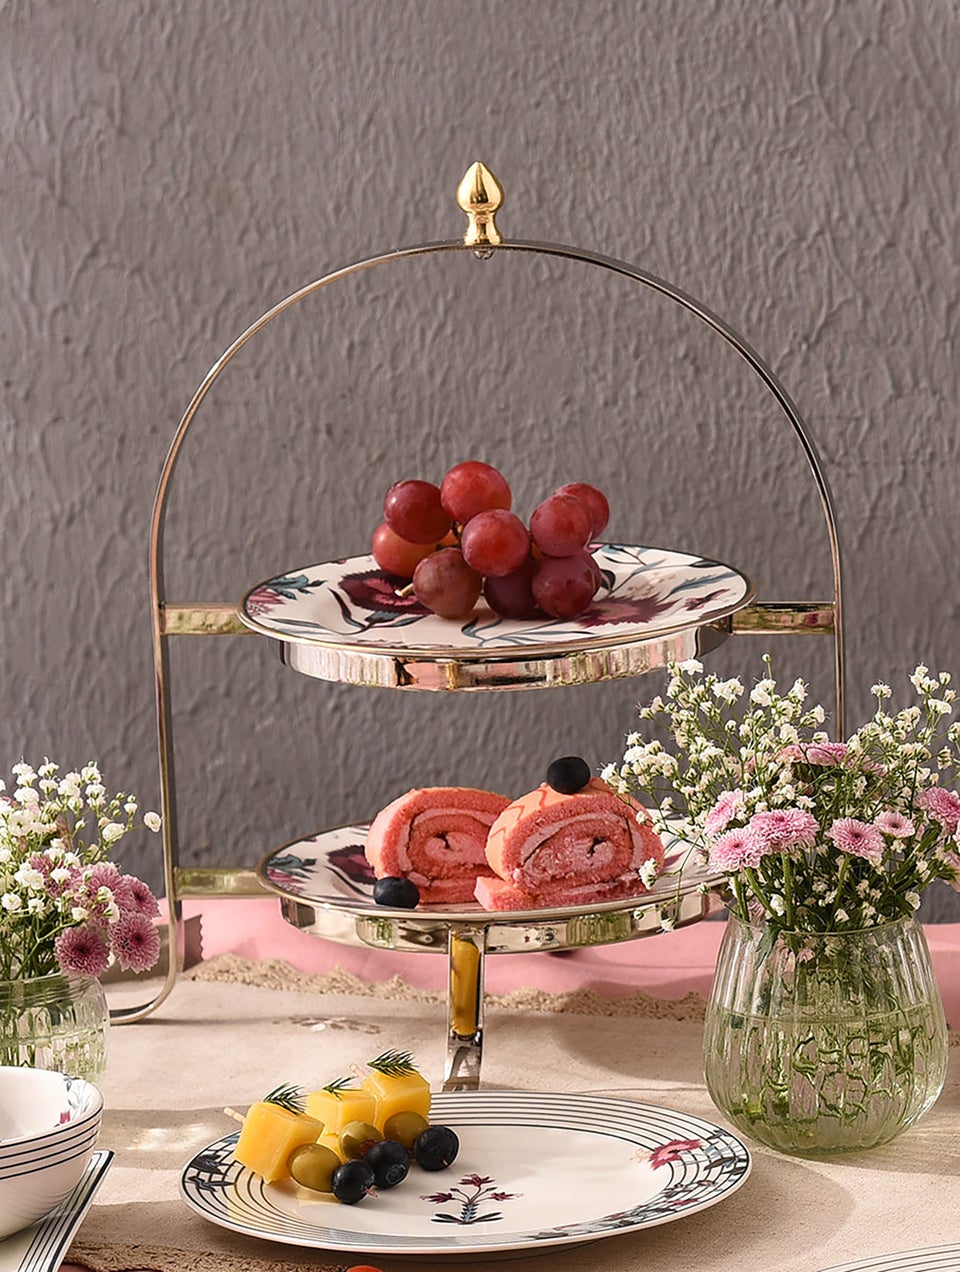 Mughal Inspired 2 Tier Cake Stand With Porcelain Plates